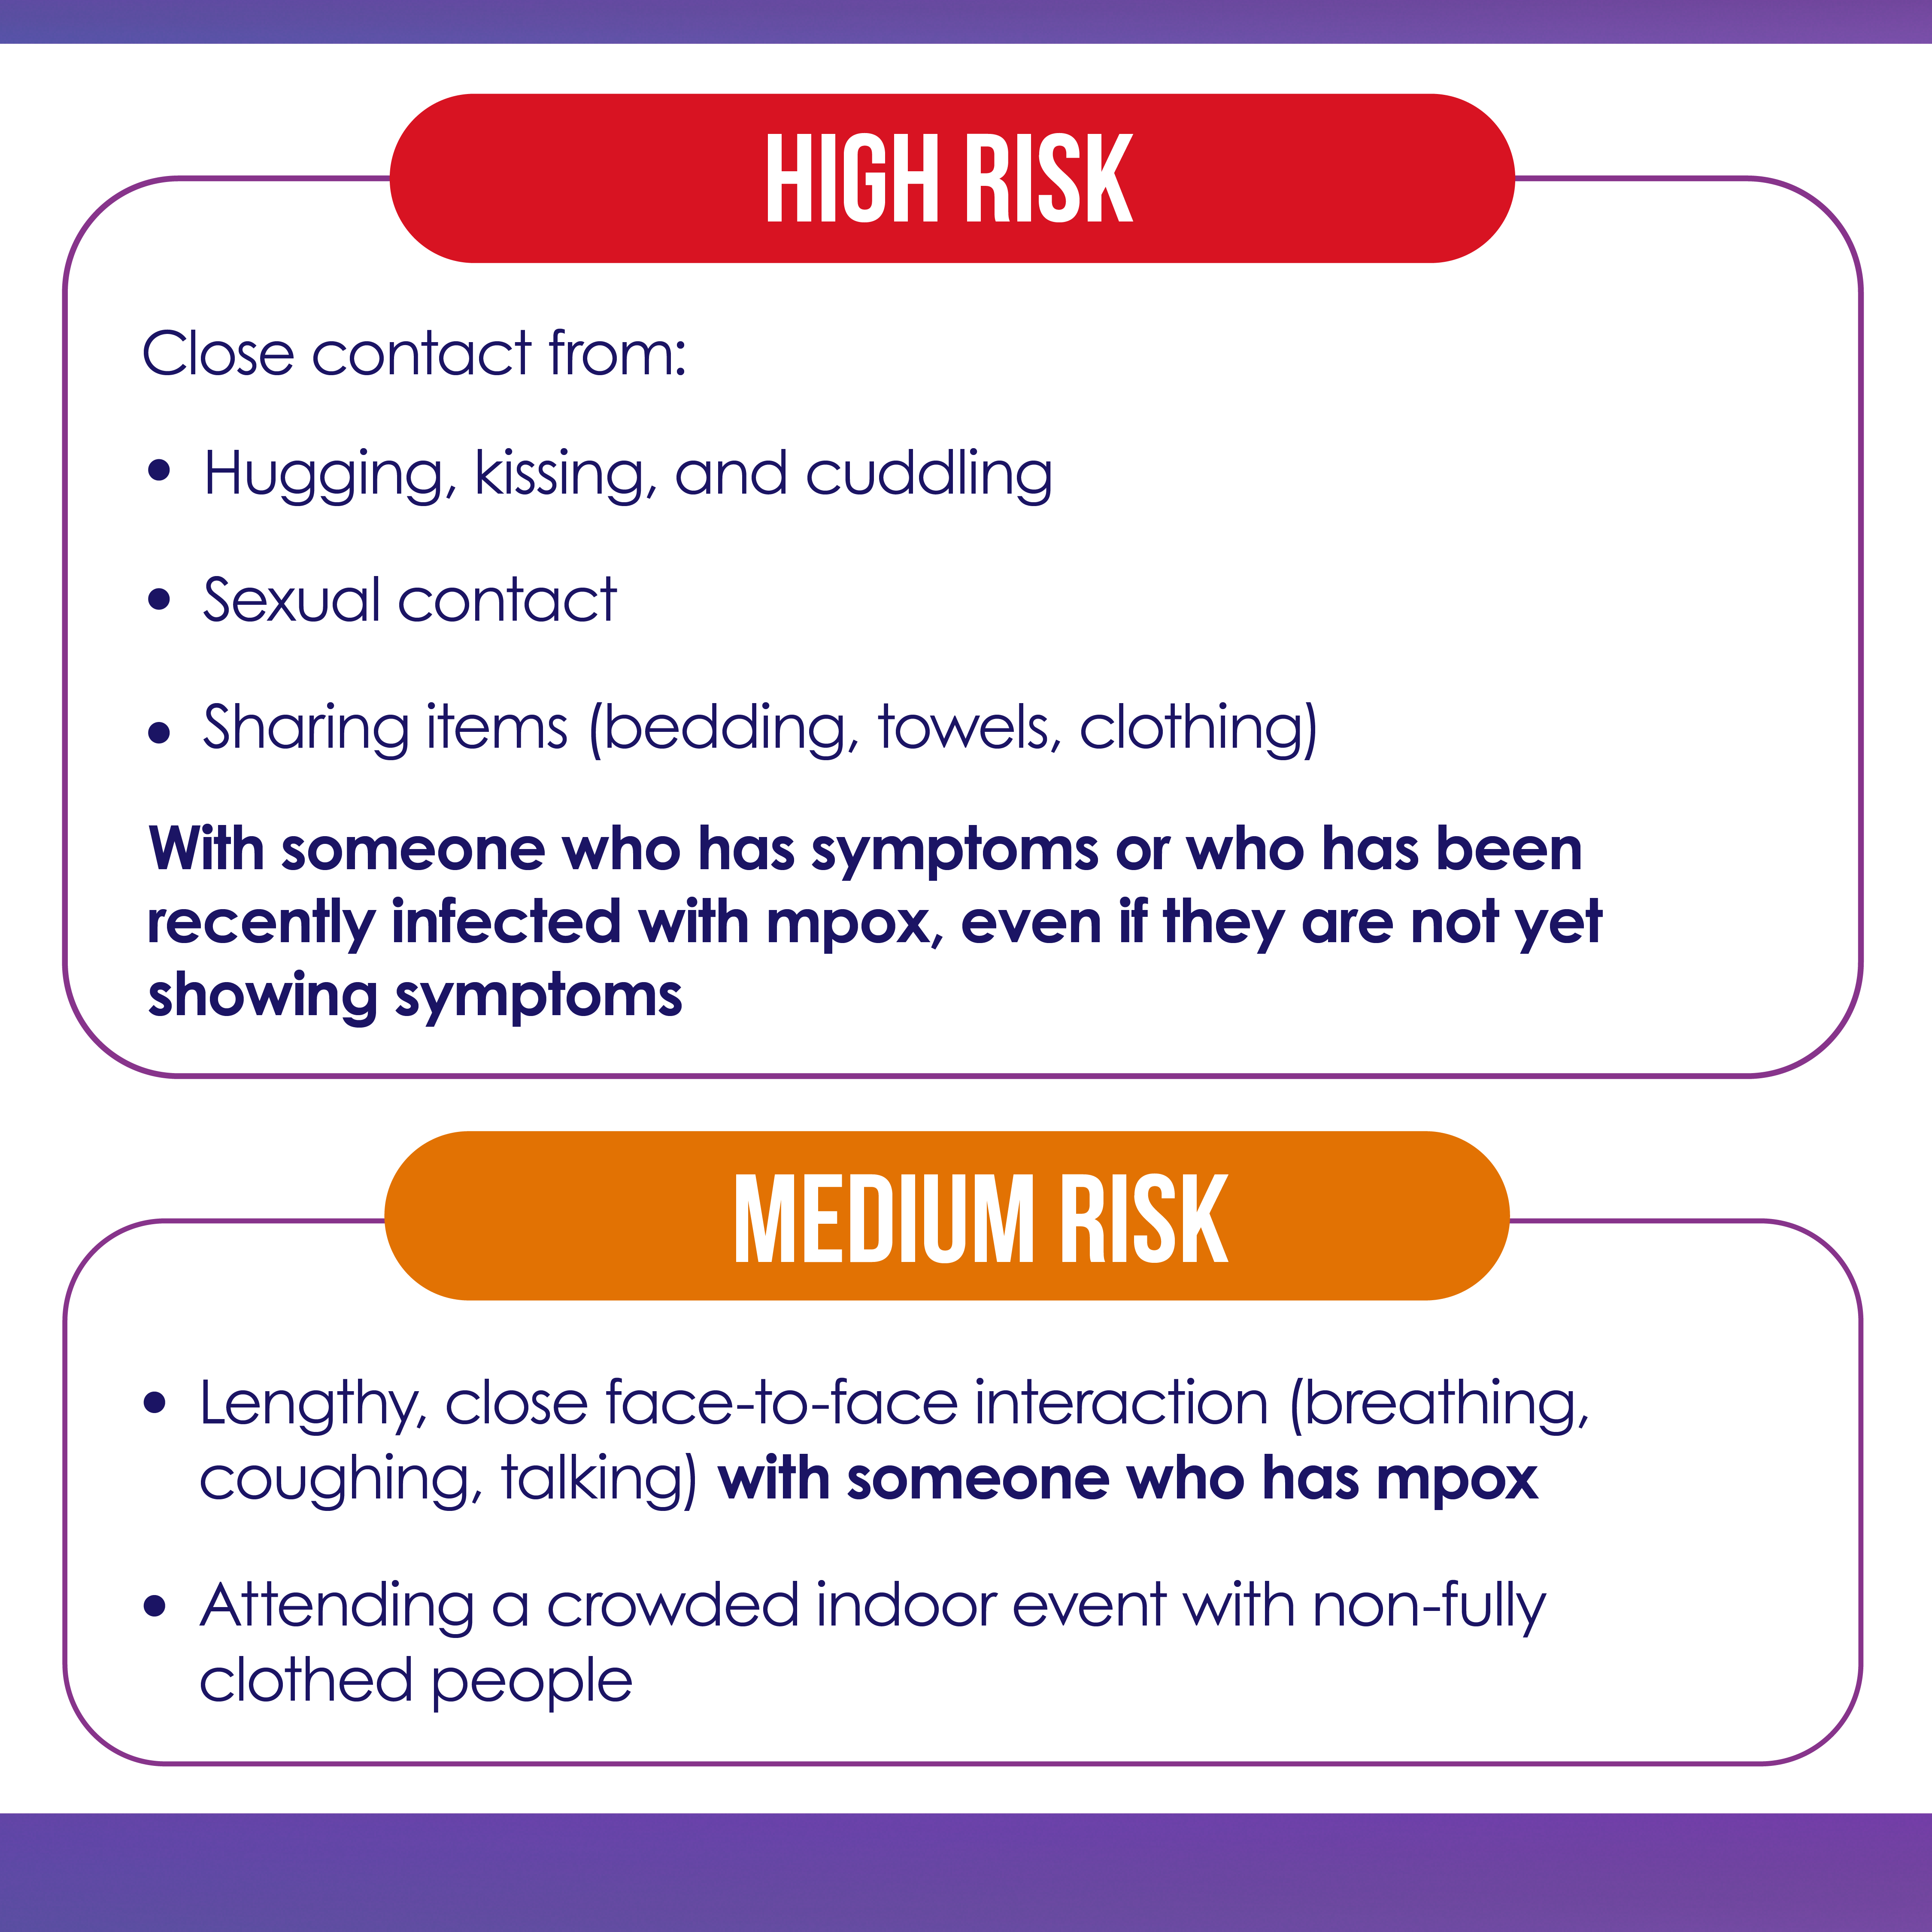 High risk: close contact from hugging, kissing, and cuddling. Medium risk: attending a crowded indoor event with non-fully cloth